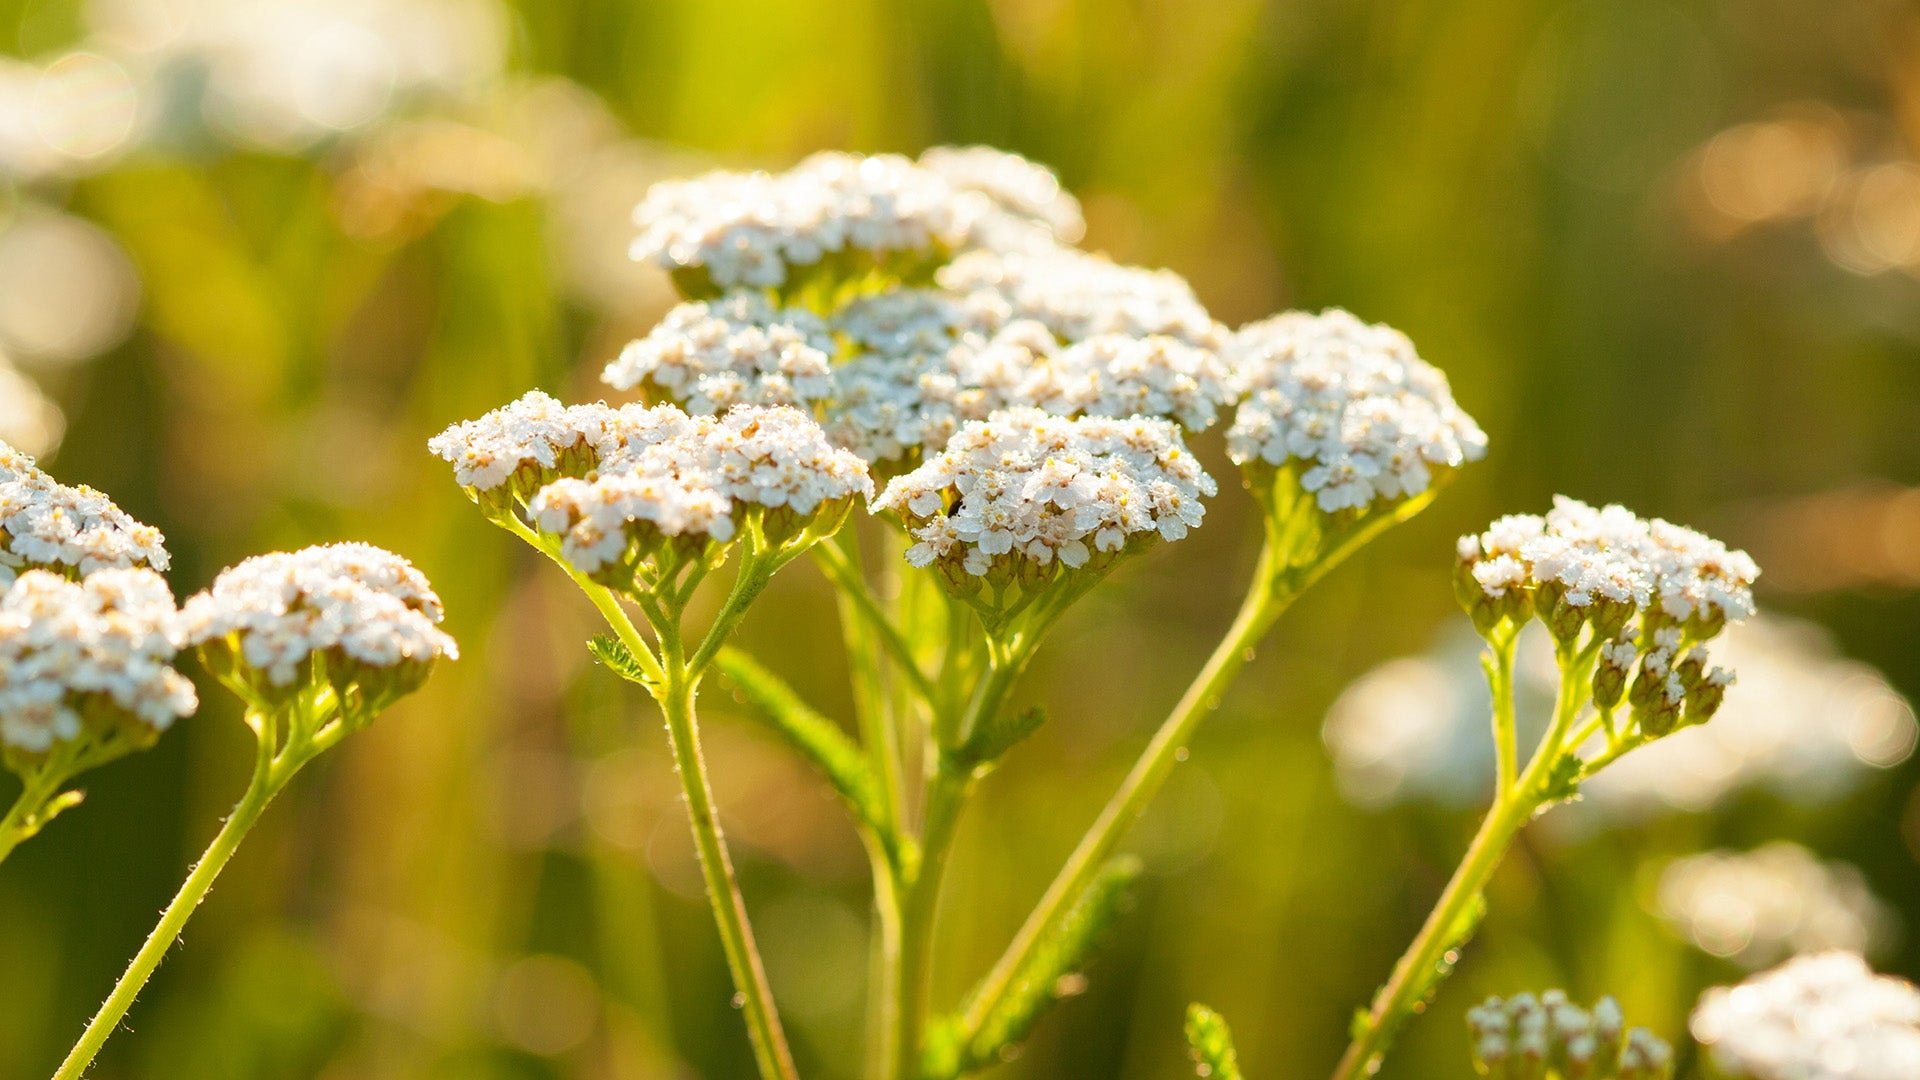 JOURNEY TO THE JAR: THE STORY OF OUR YARROW